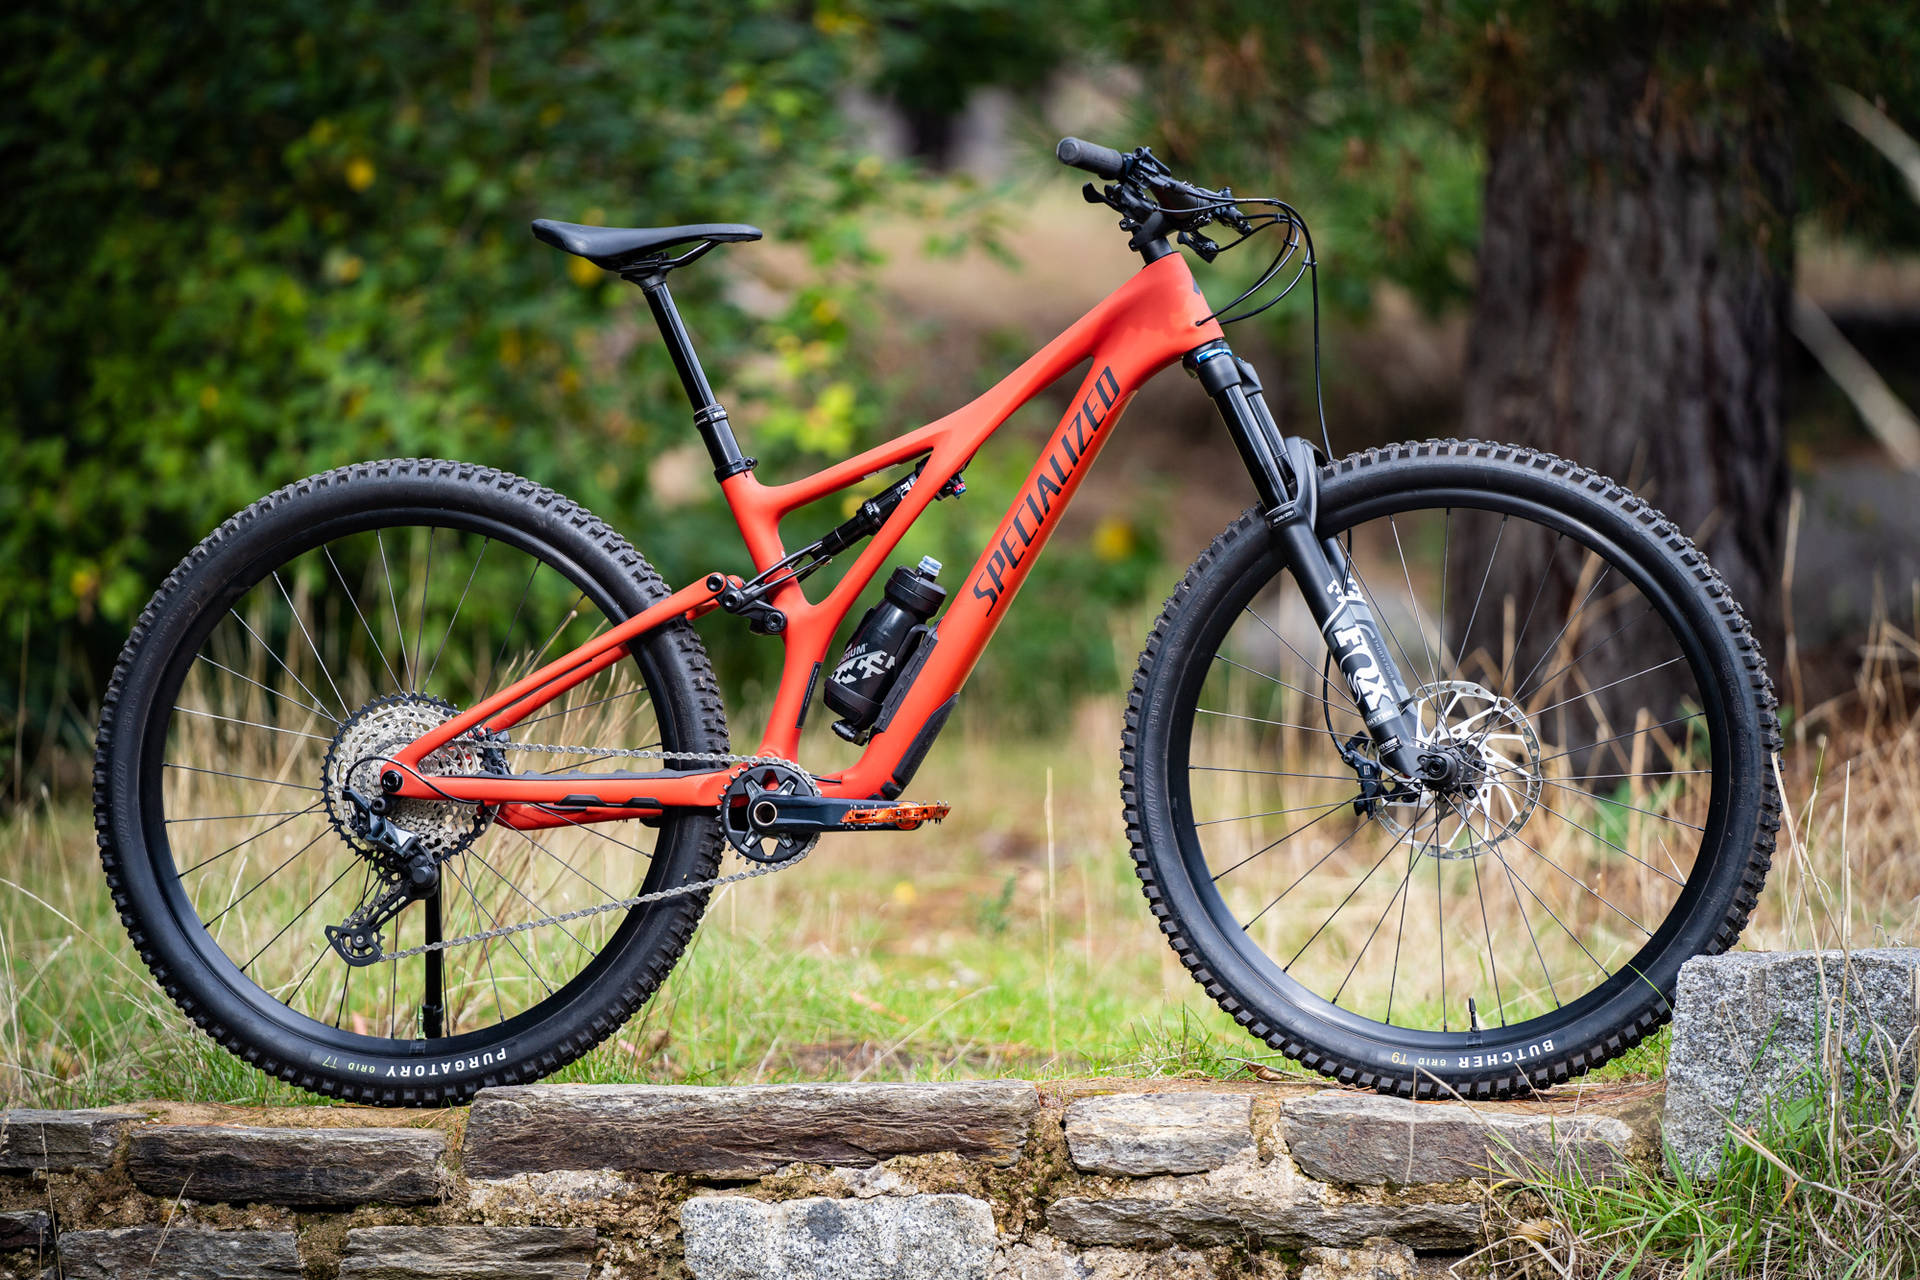 Vibrant Orange Specialized Bike in the Great Outdoors Wallpaper